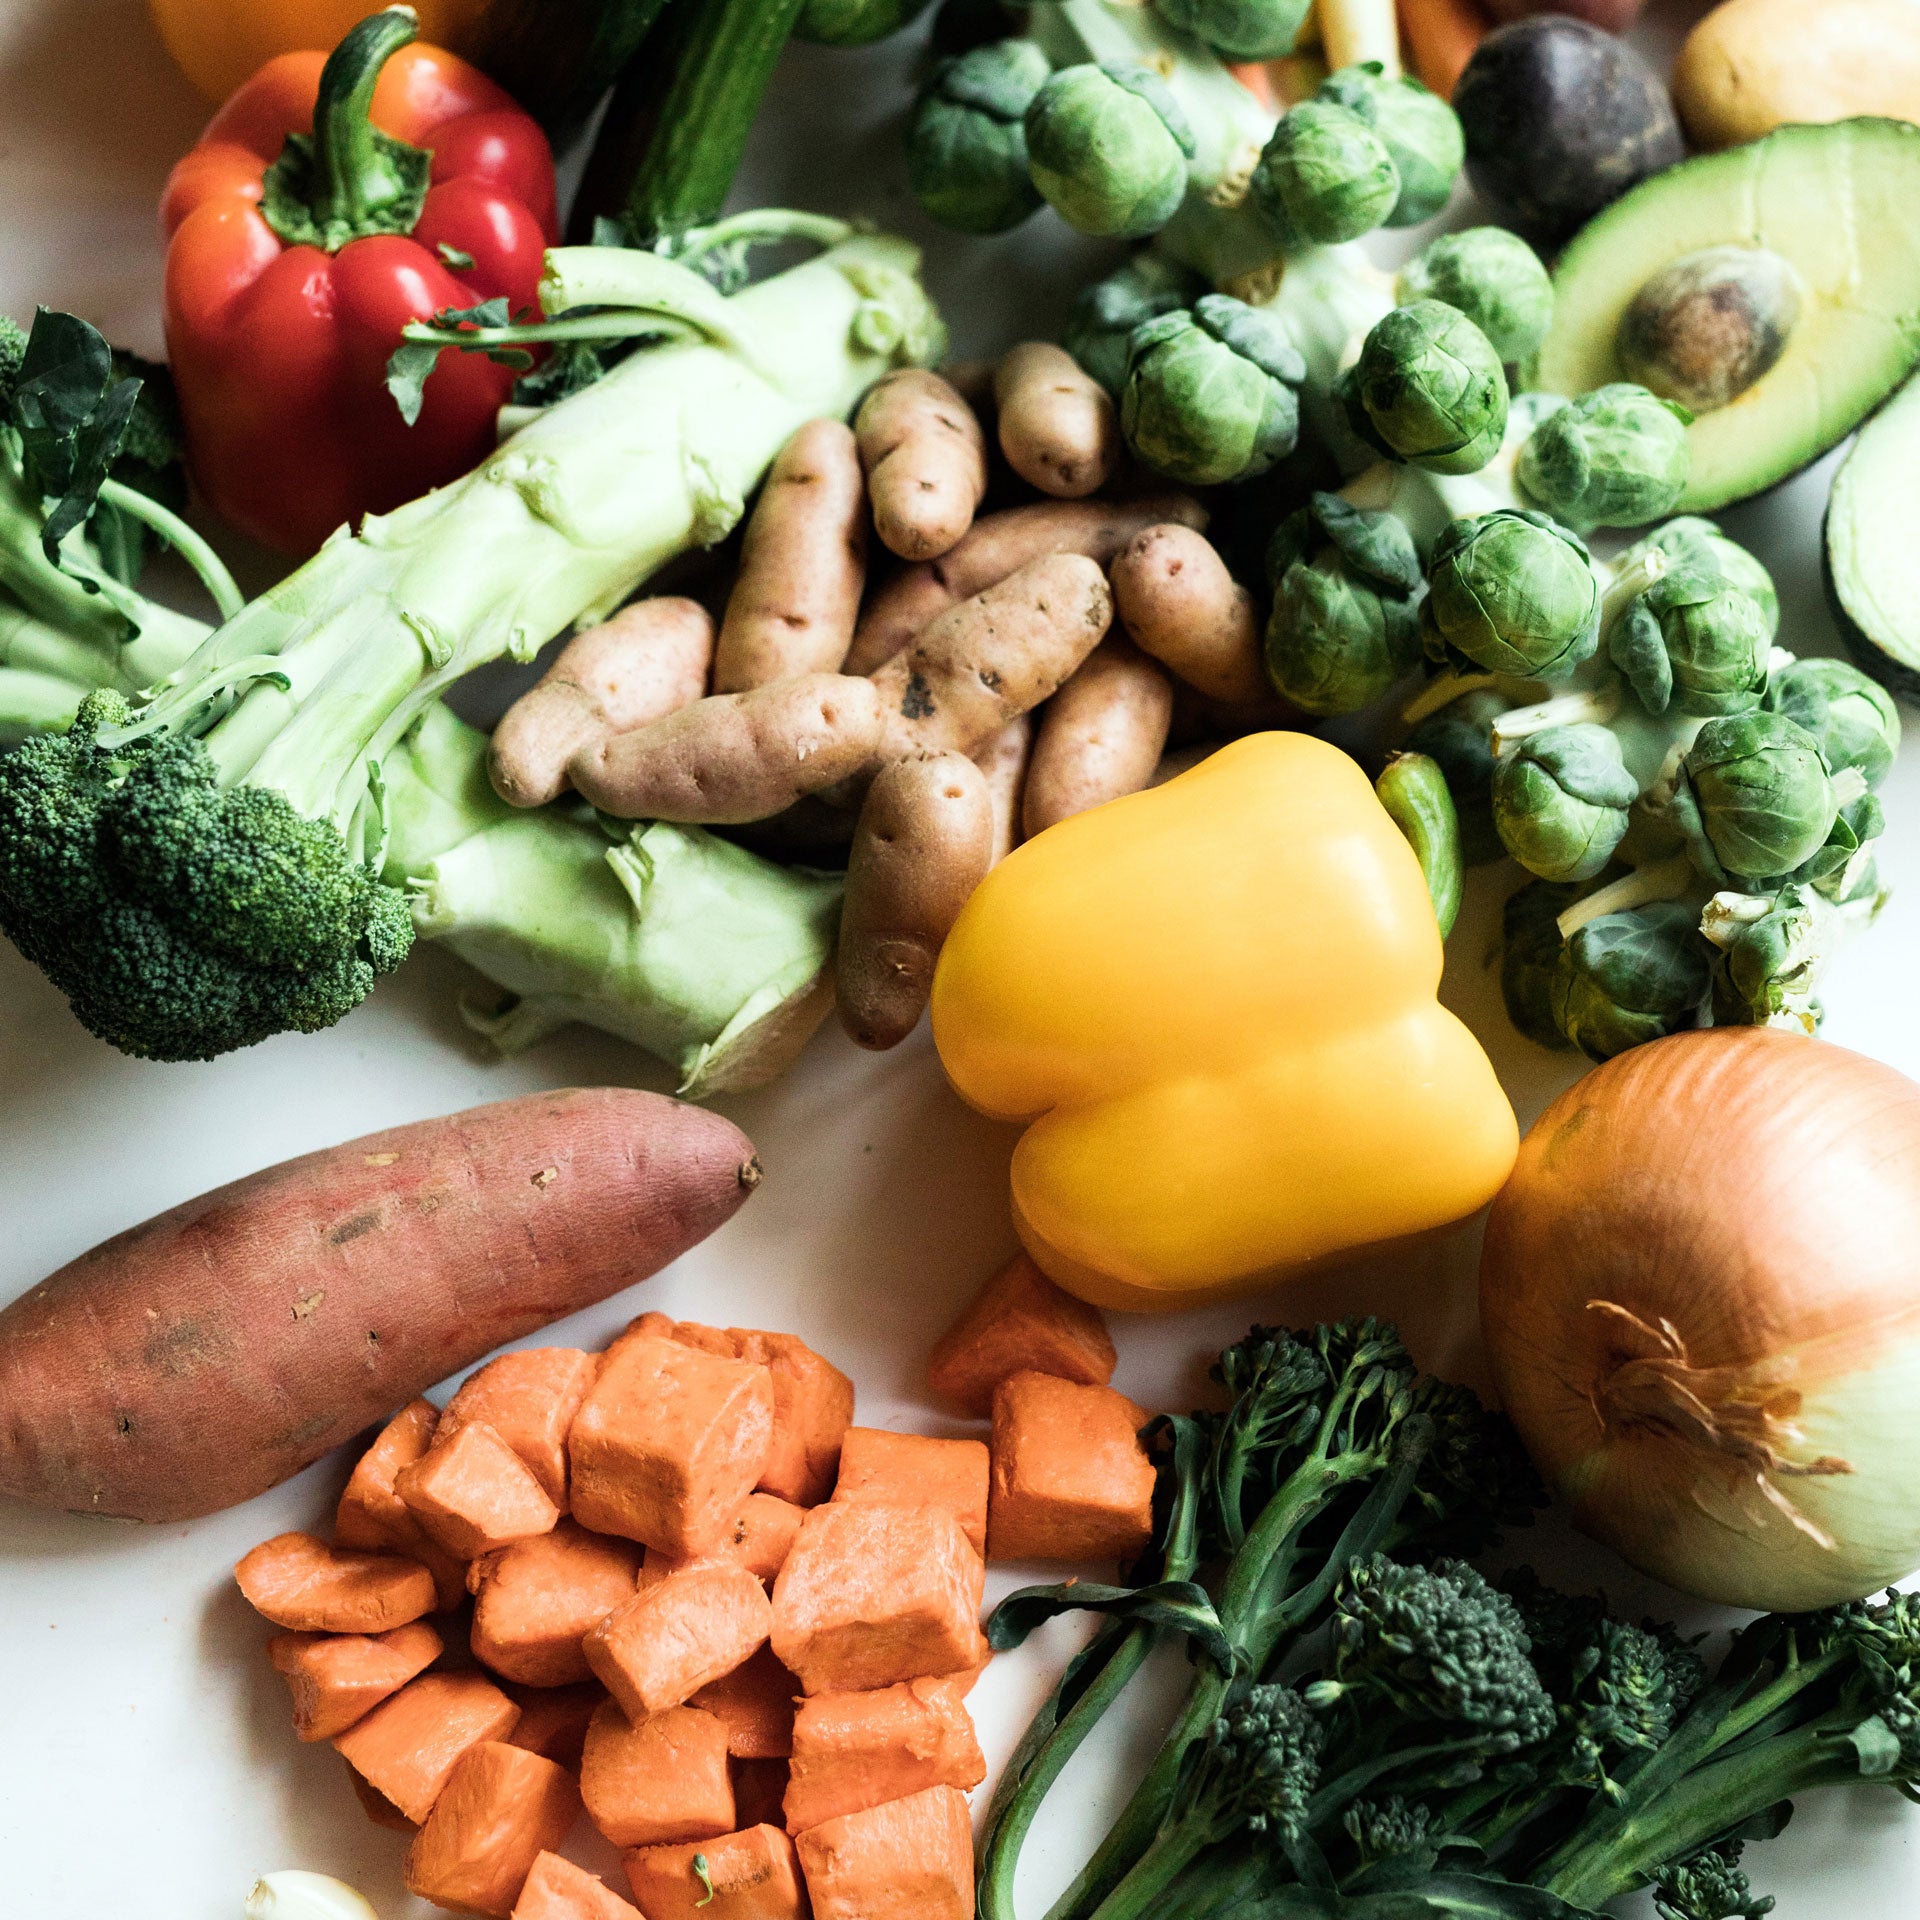 The simplest rules for clean eating